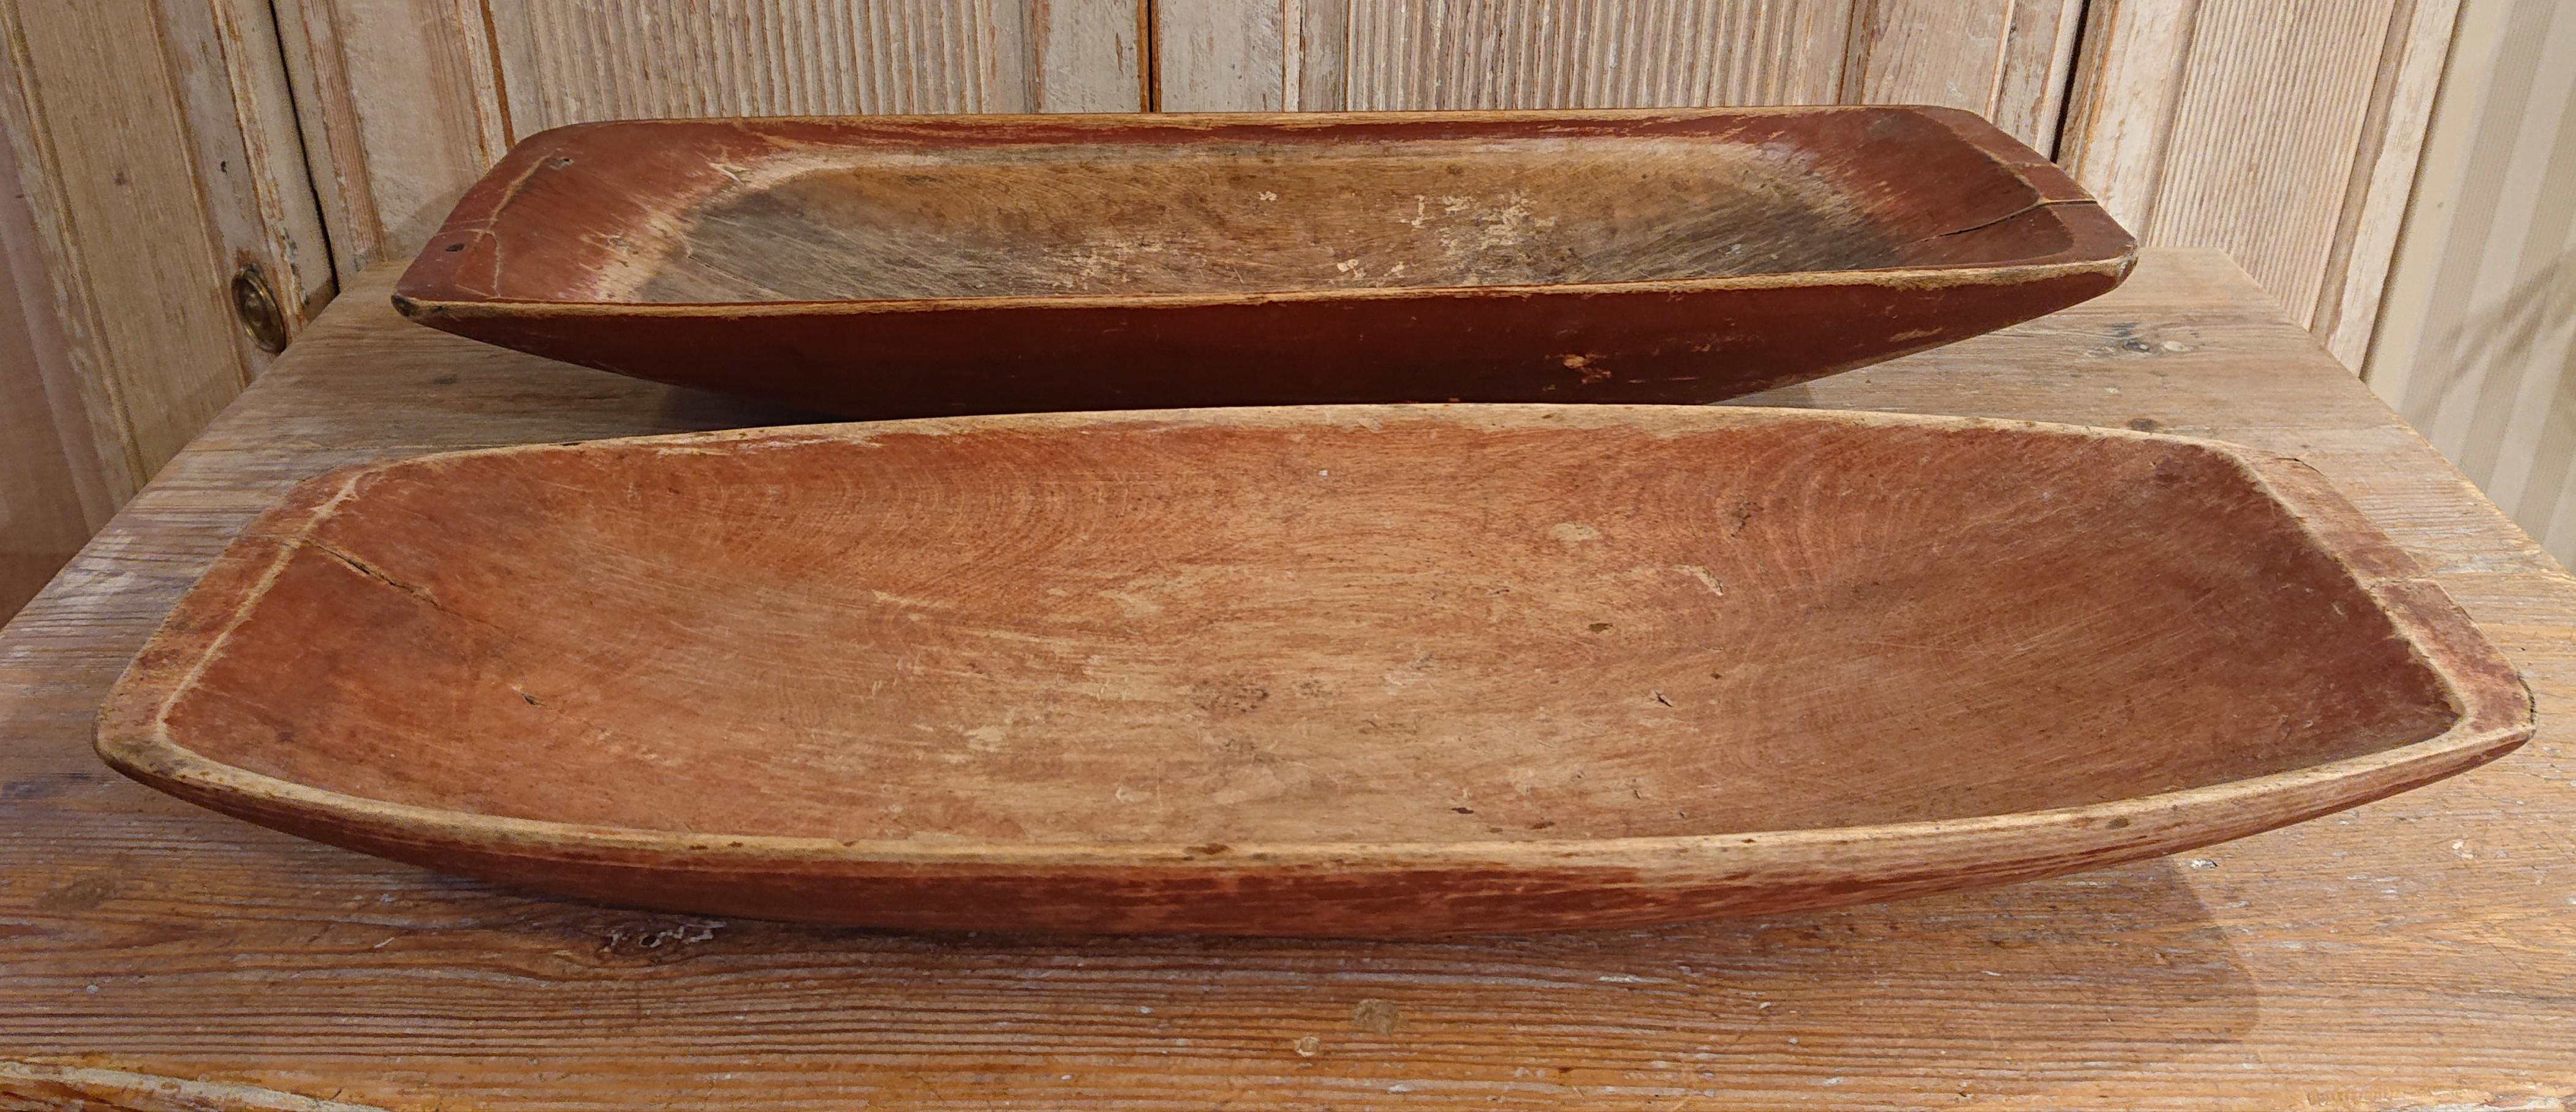 Two Swedish 19th Century Trough with Originalpaint from Northern Sweden For Sale 11